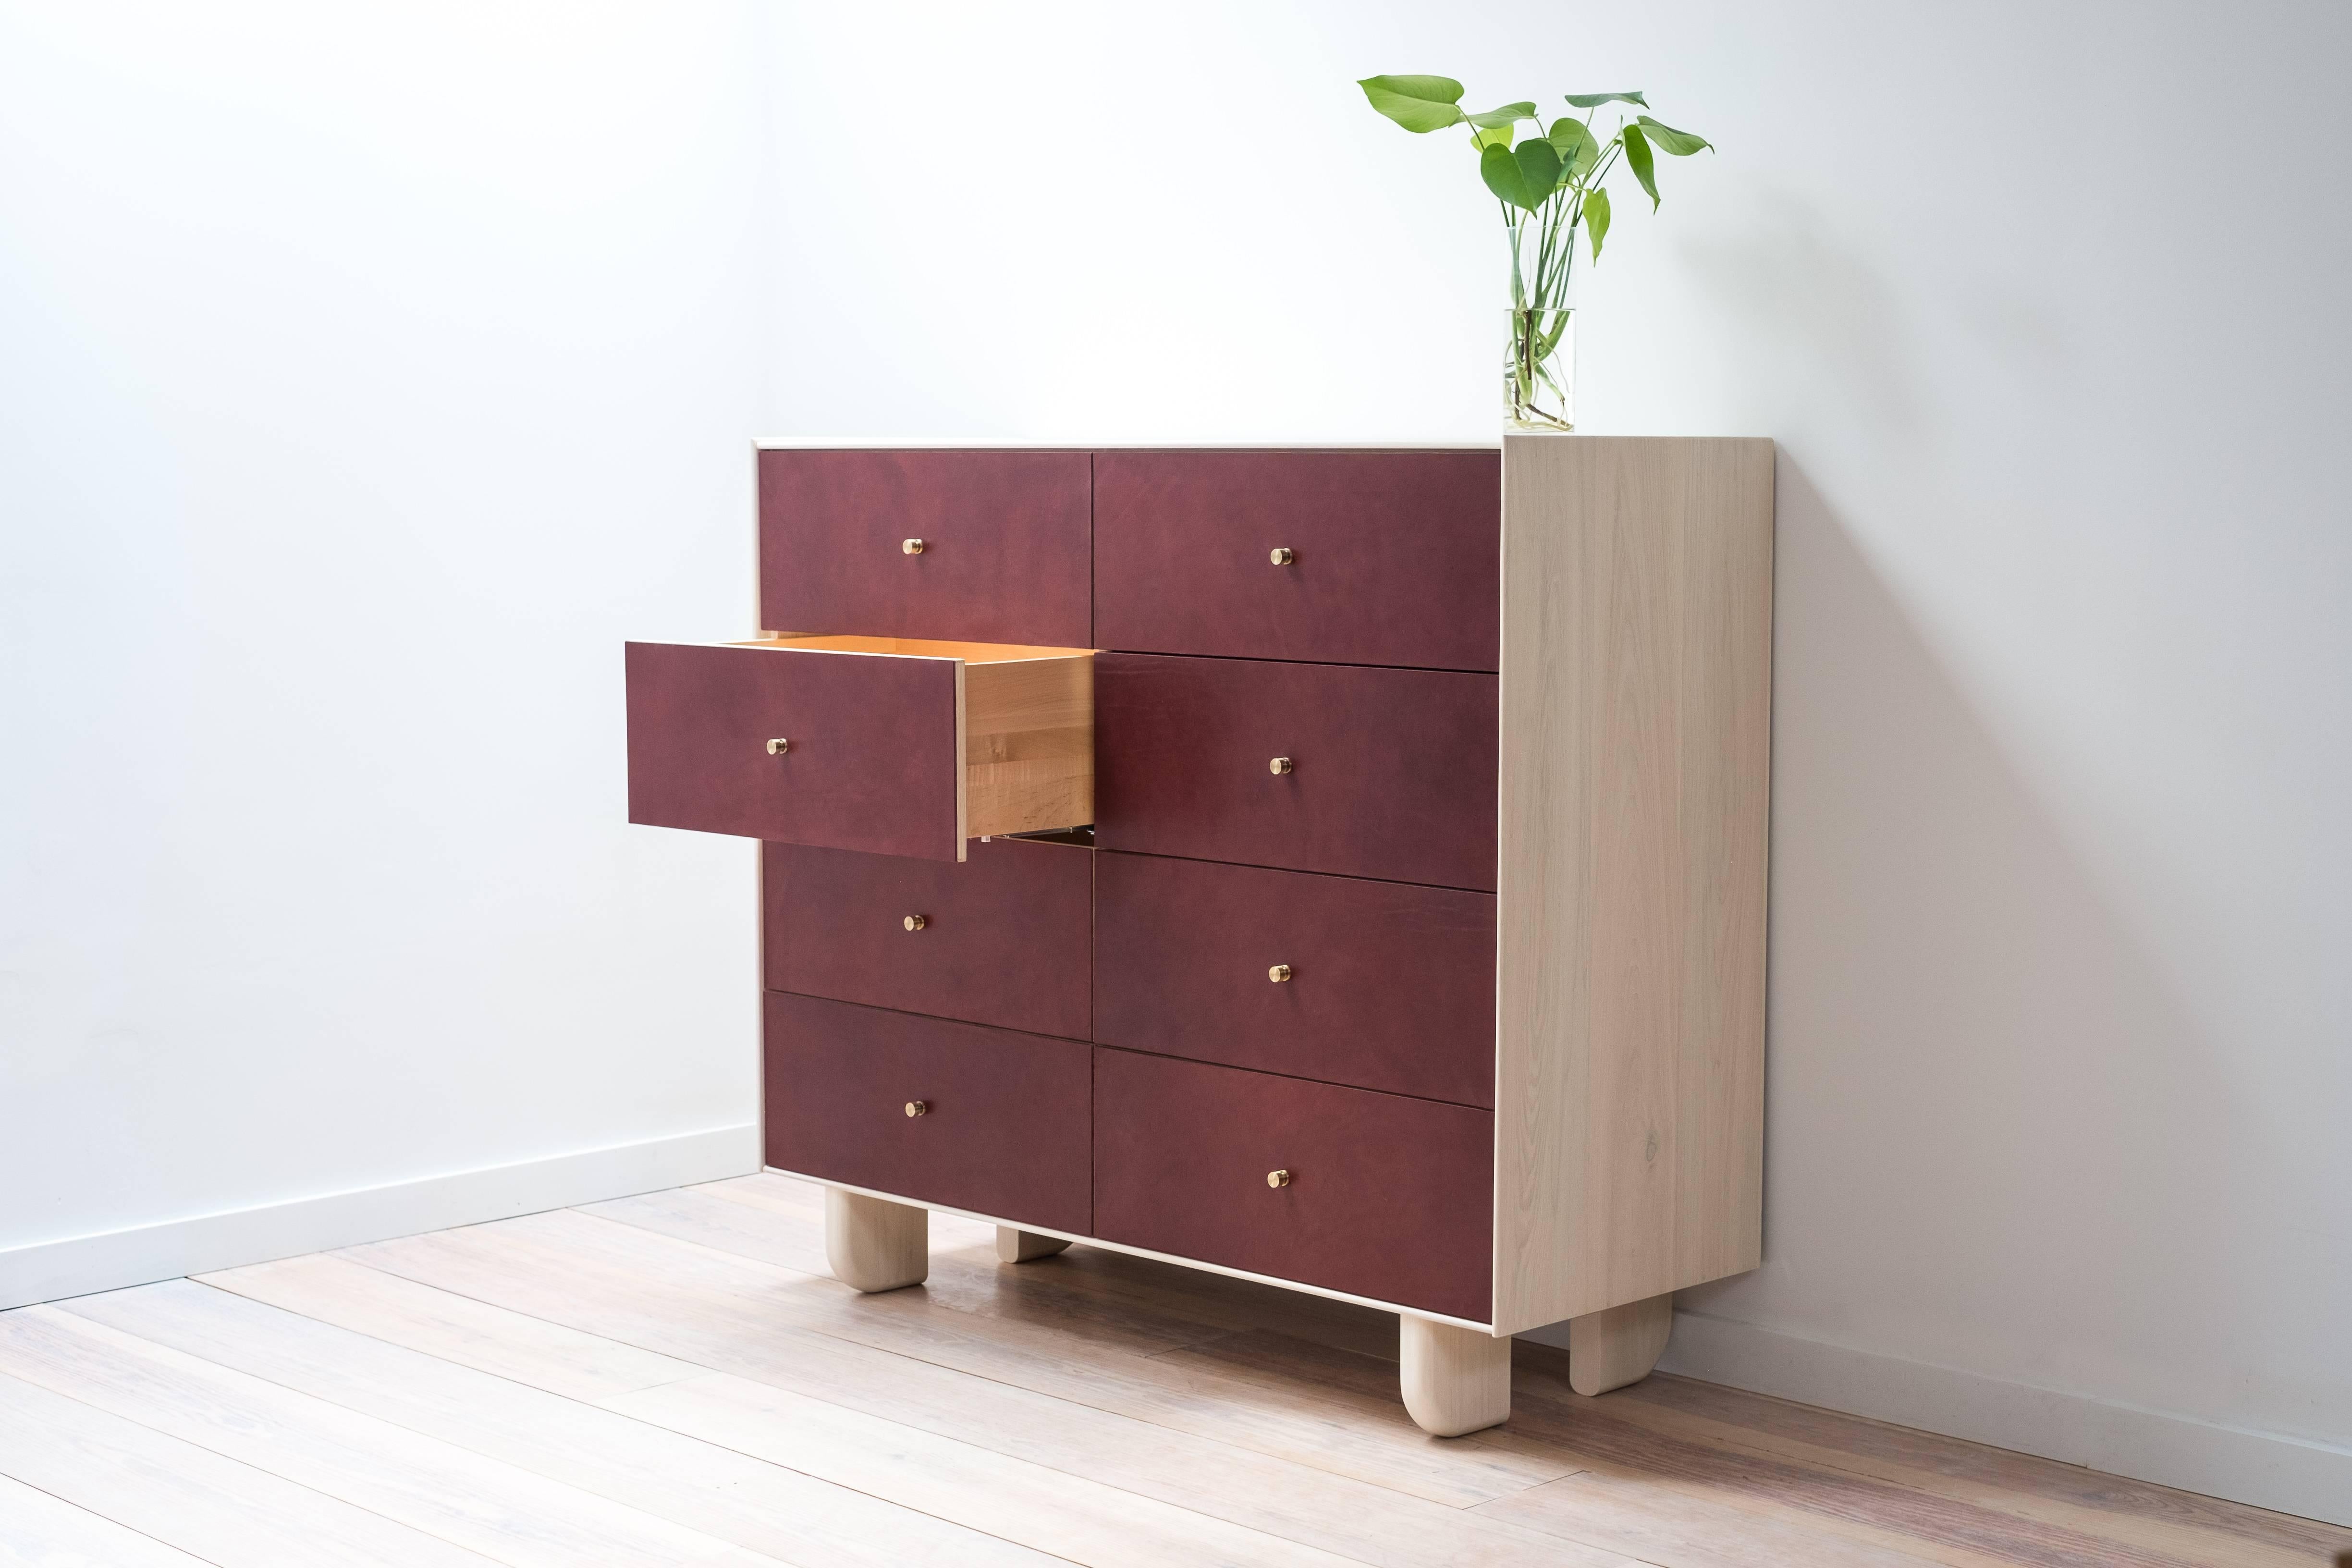 The Profile Dresser is an elevated take on traditional cabinet construction with a clean, minimal edge framing vegetable tanned leather drawer faces. Both the wood and leather are hand finished in Stillmade's New York based building facility.